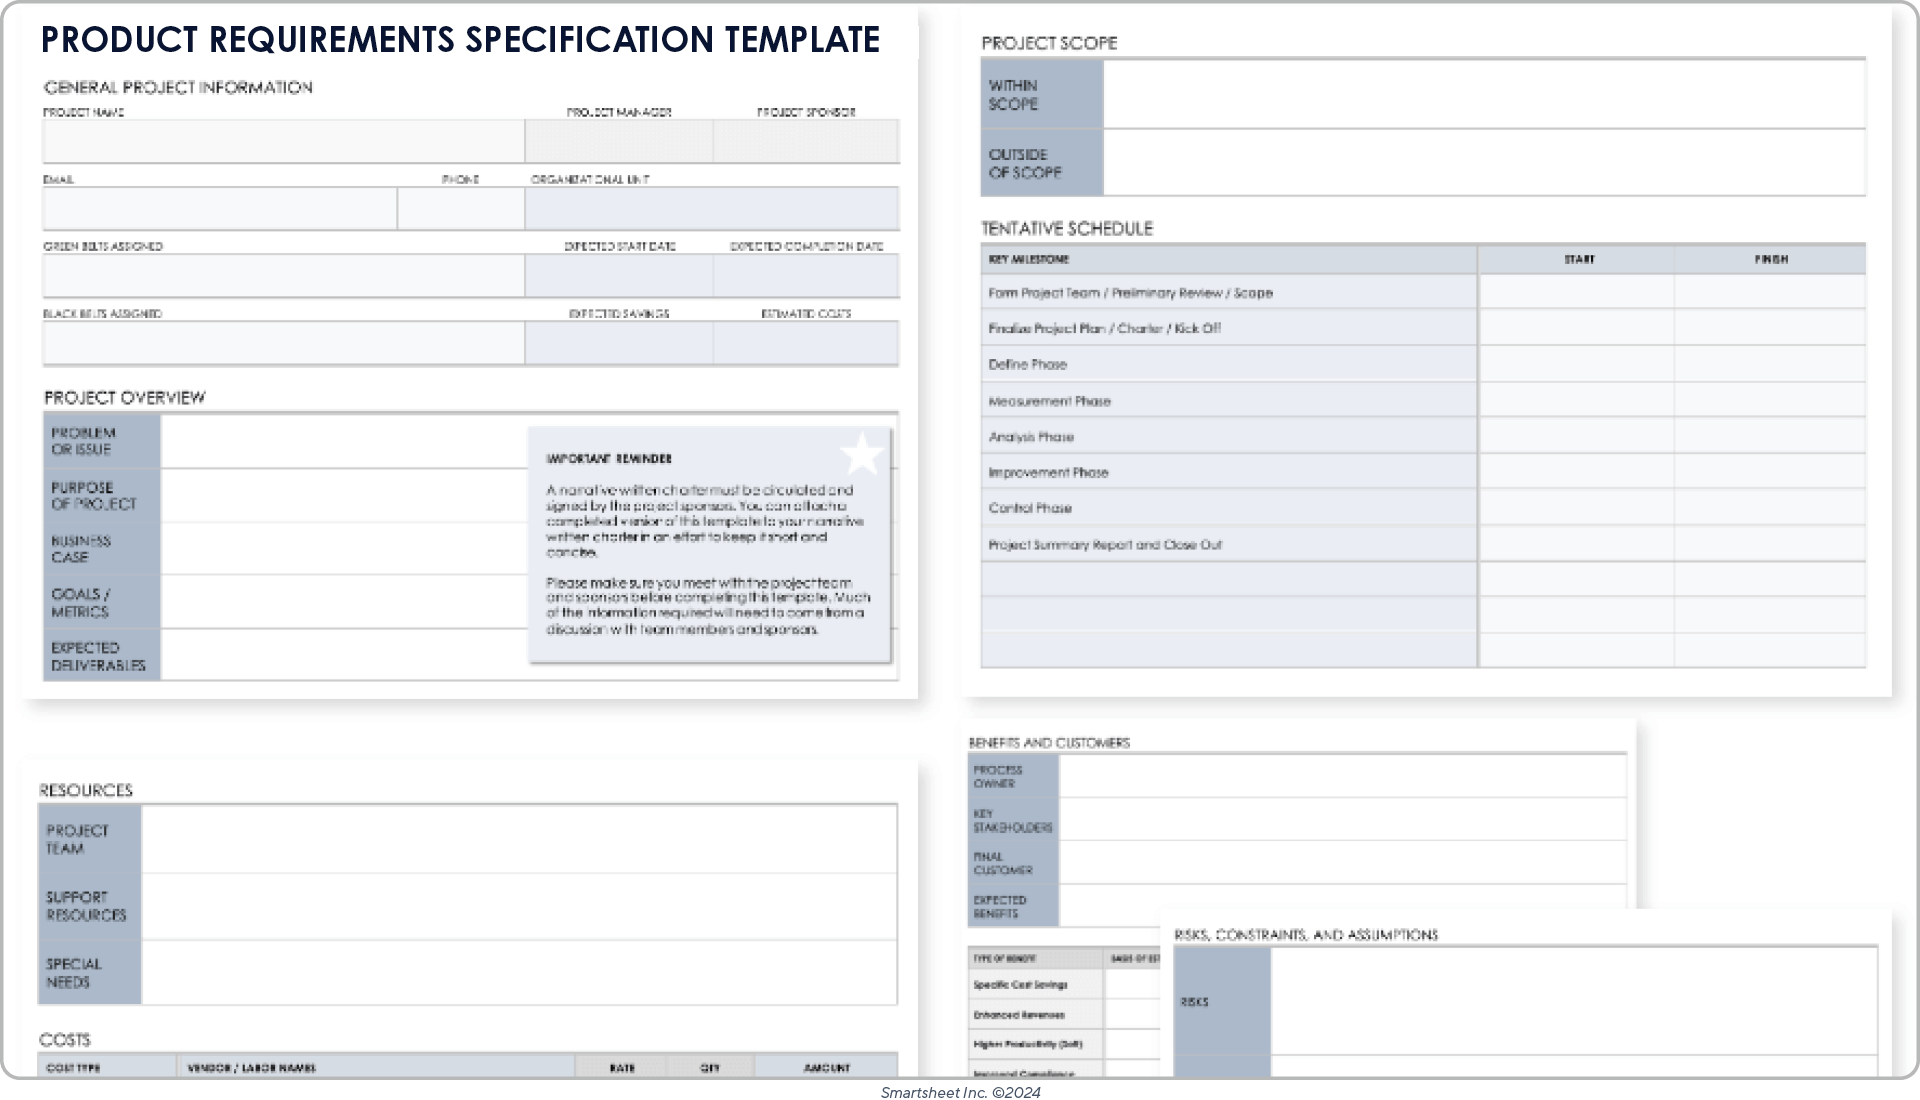 Project Requirements Specification Template